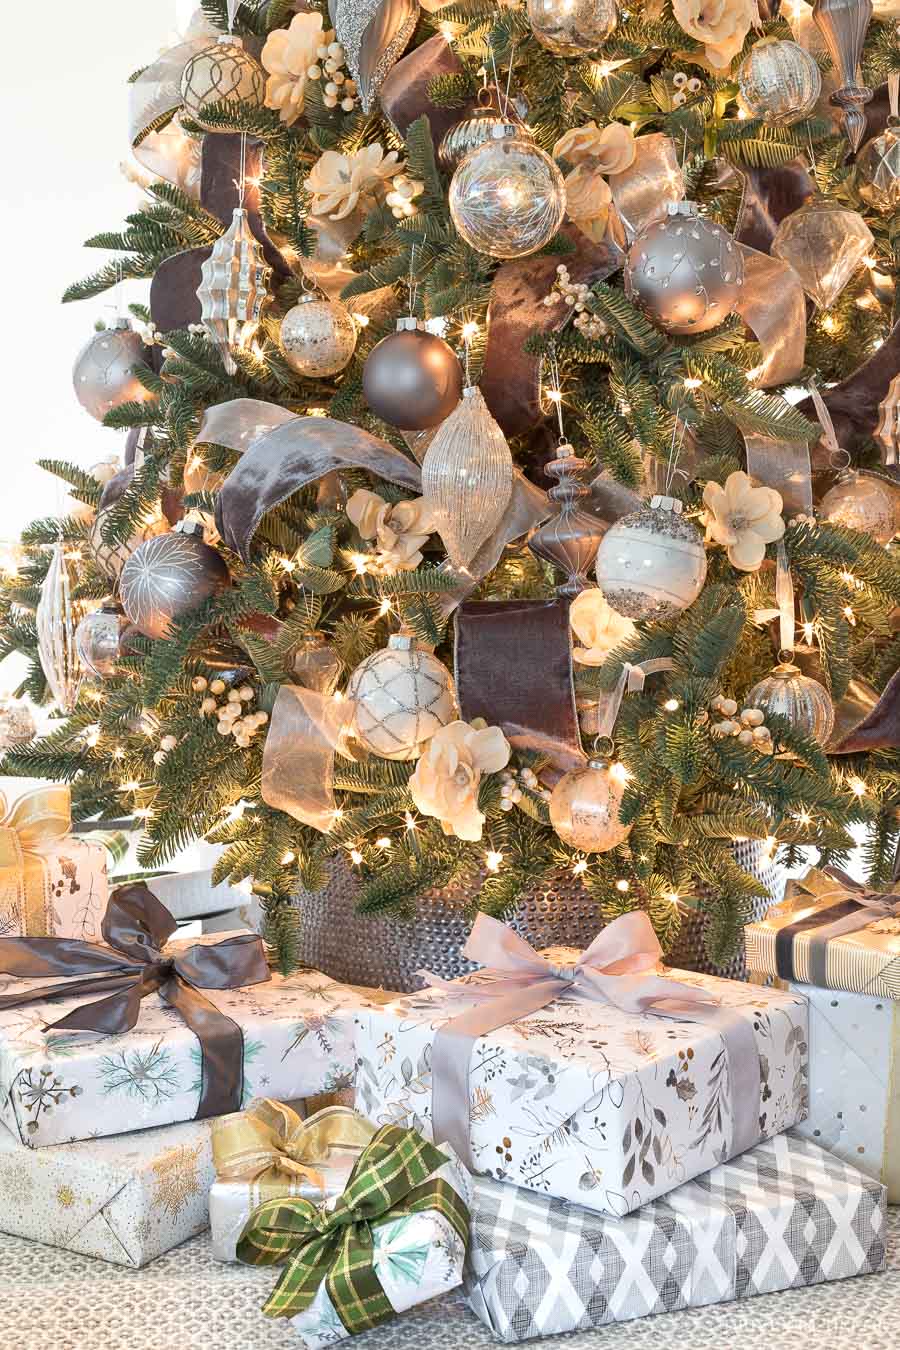 Our Christmas tree decorated in silver and golds!